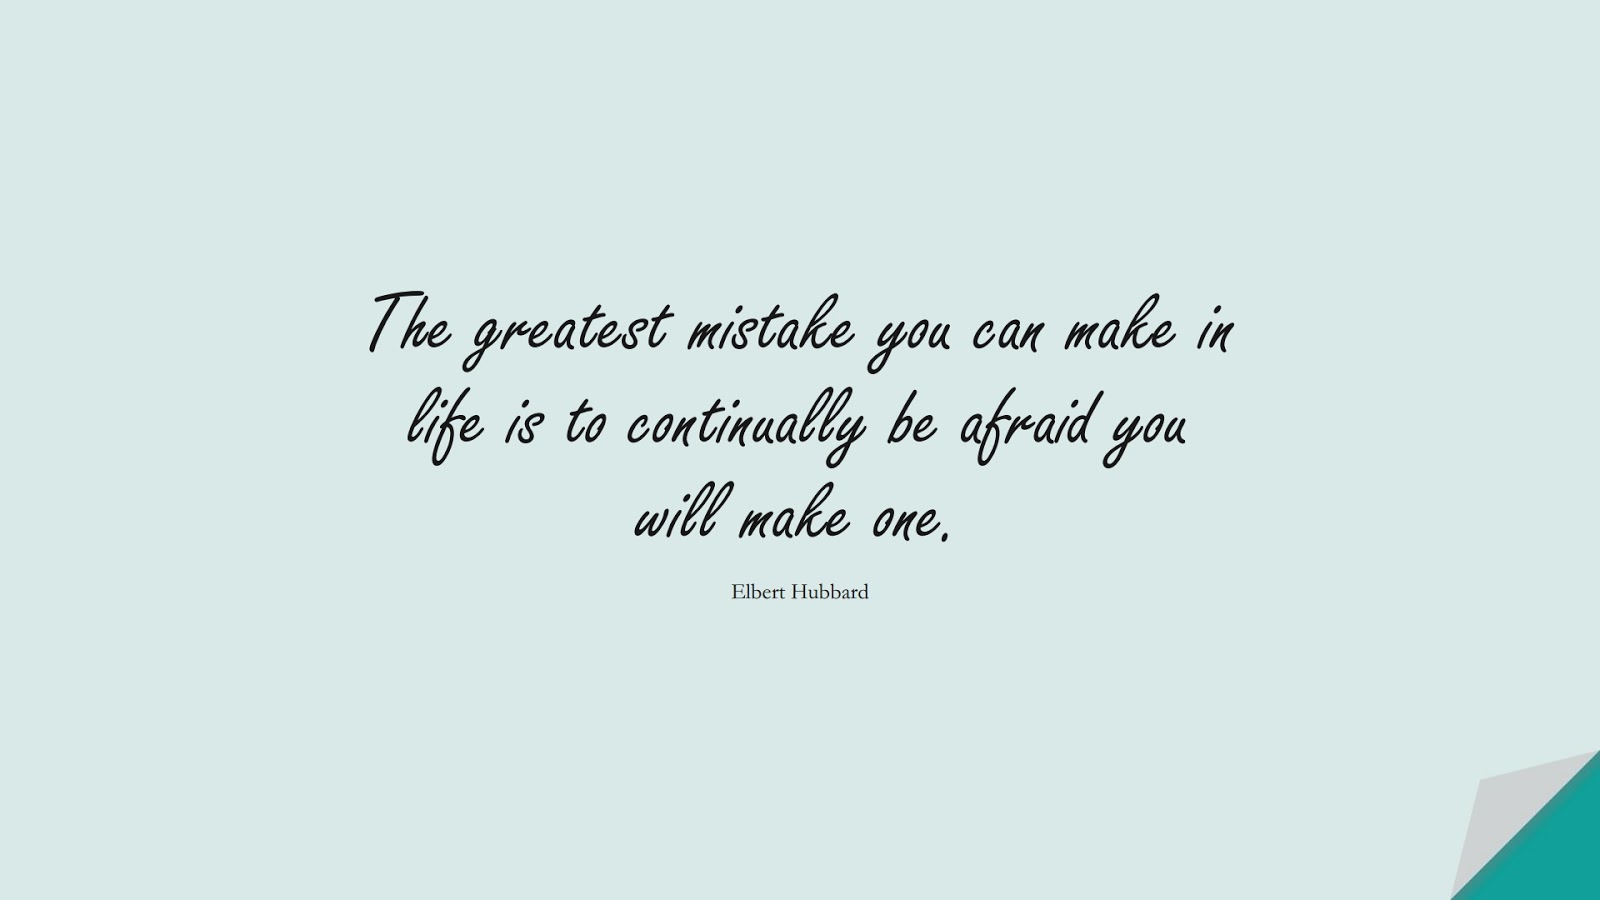 The greatest mistake you can make in life is to continually be afraid you will make one. (Elbert Hubbard);  #FearQuotes